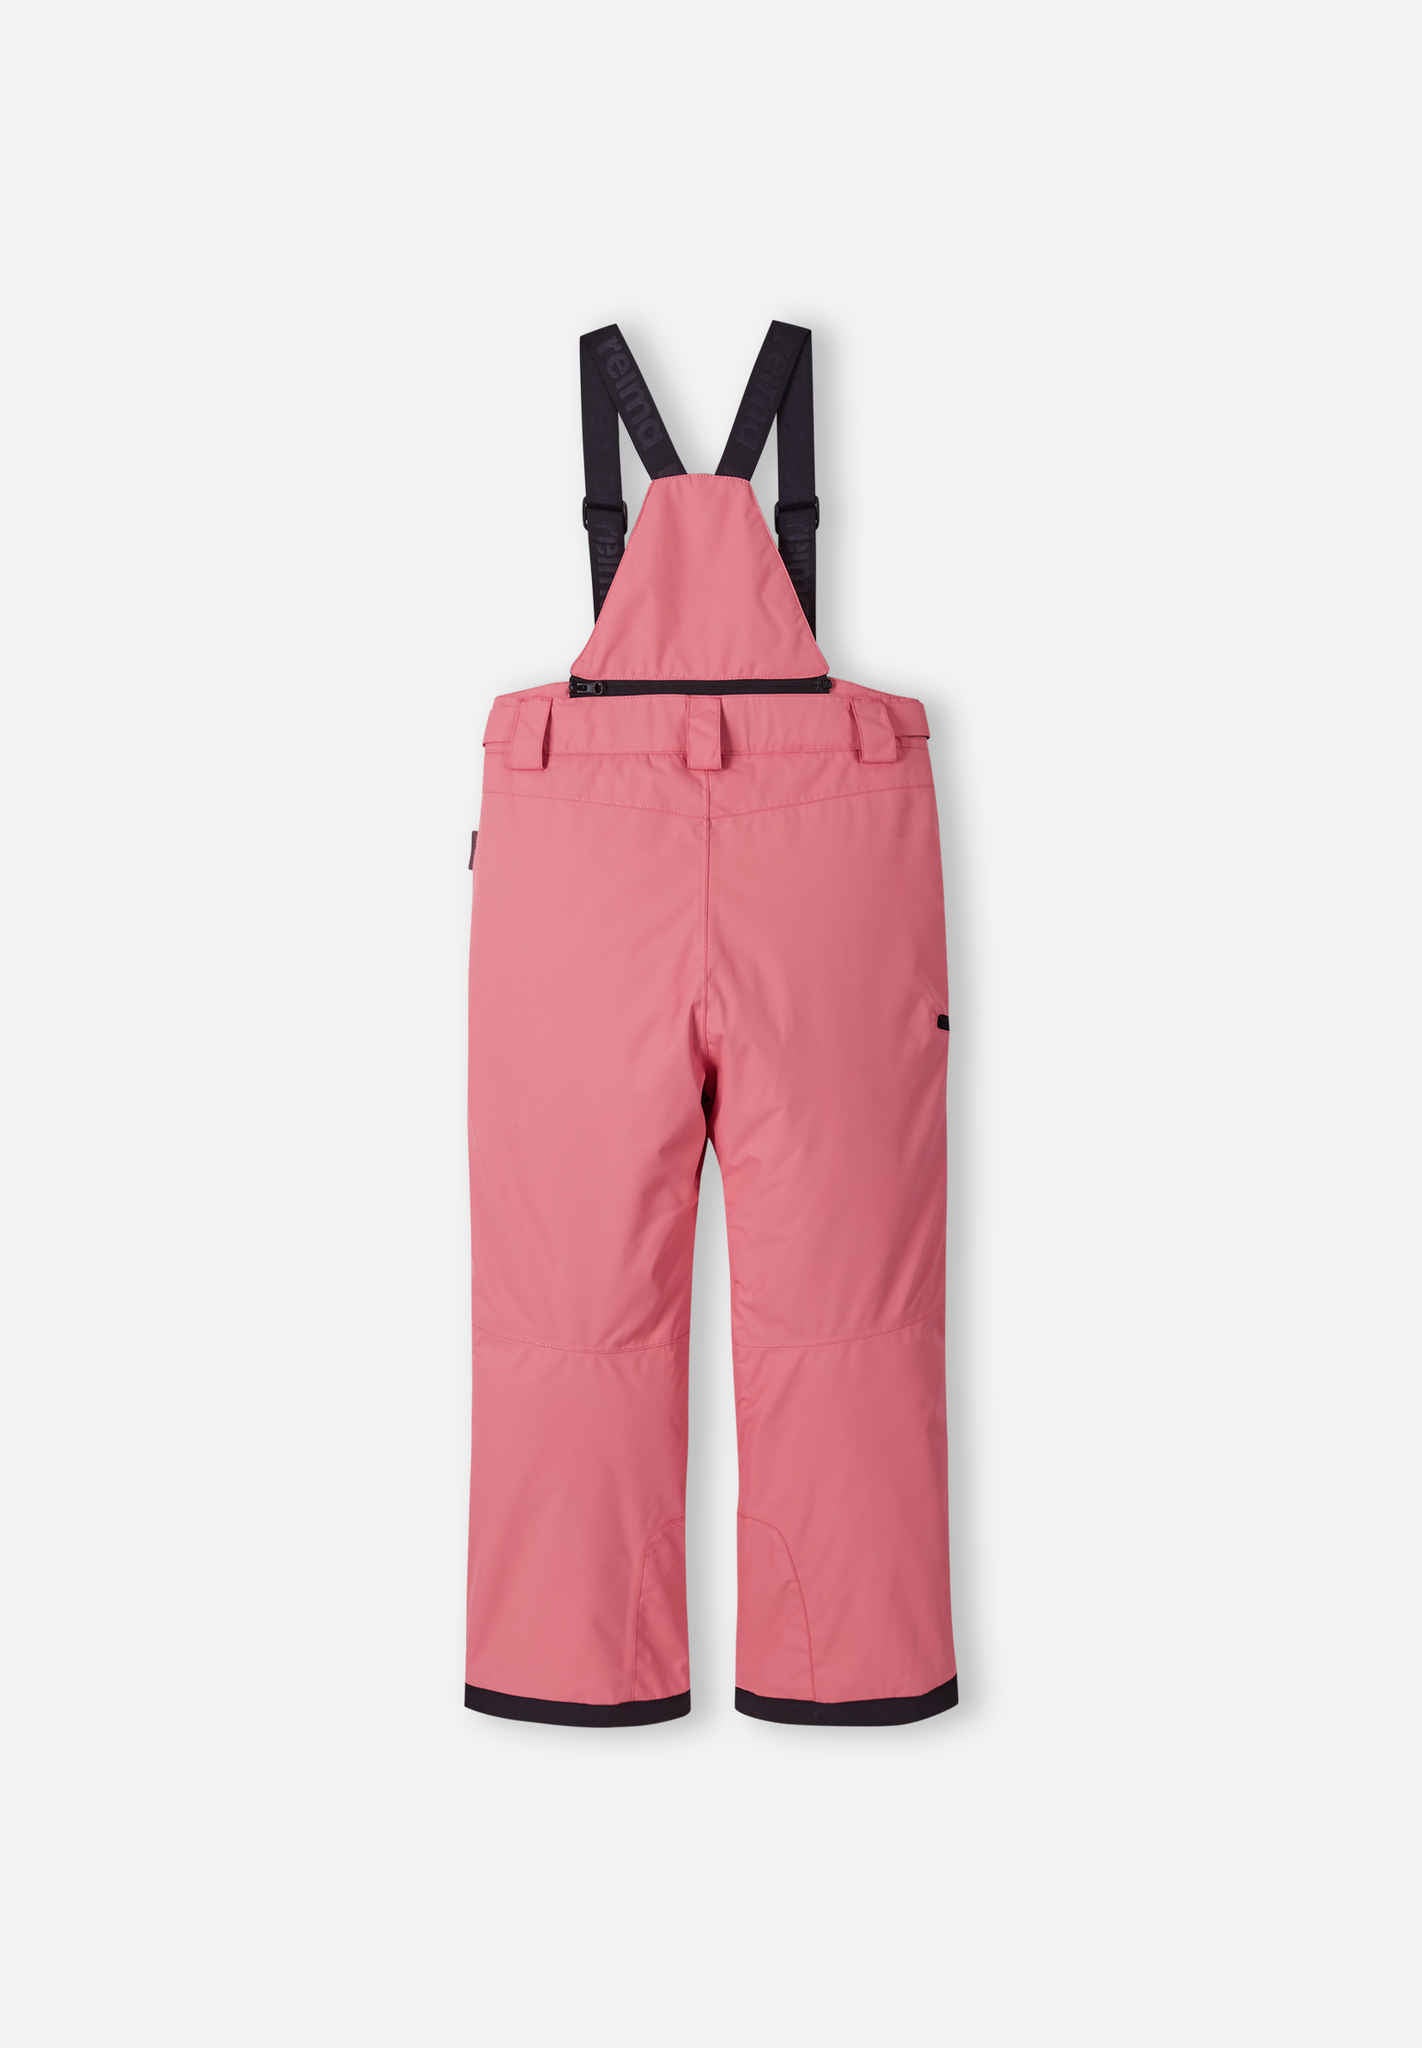 Shop Children's Snow Pants and Ski Bibs from Reima US